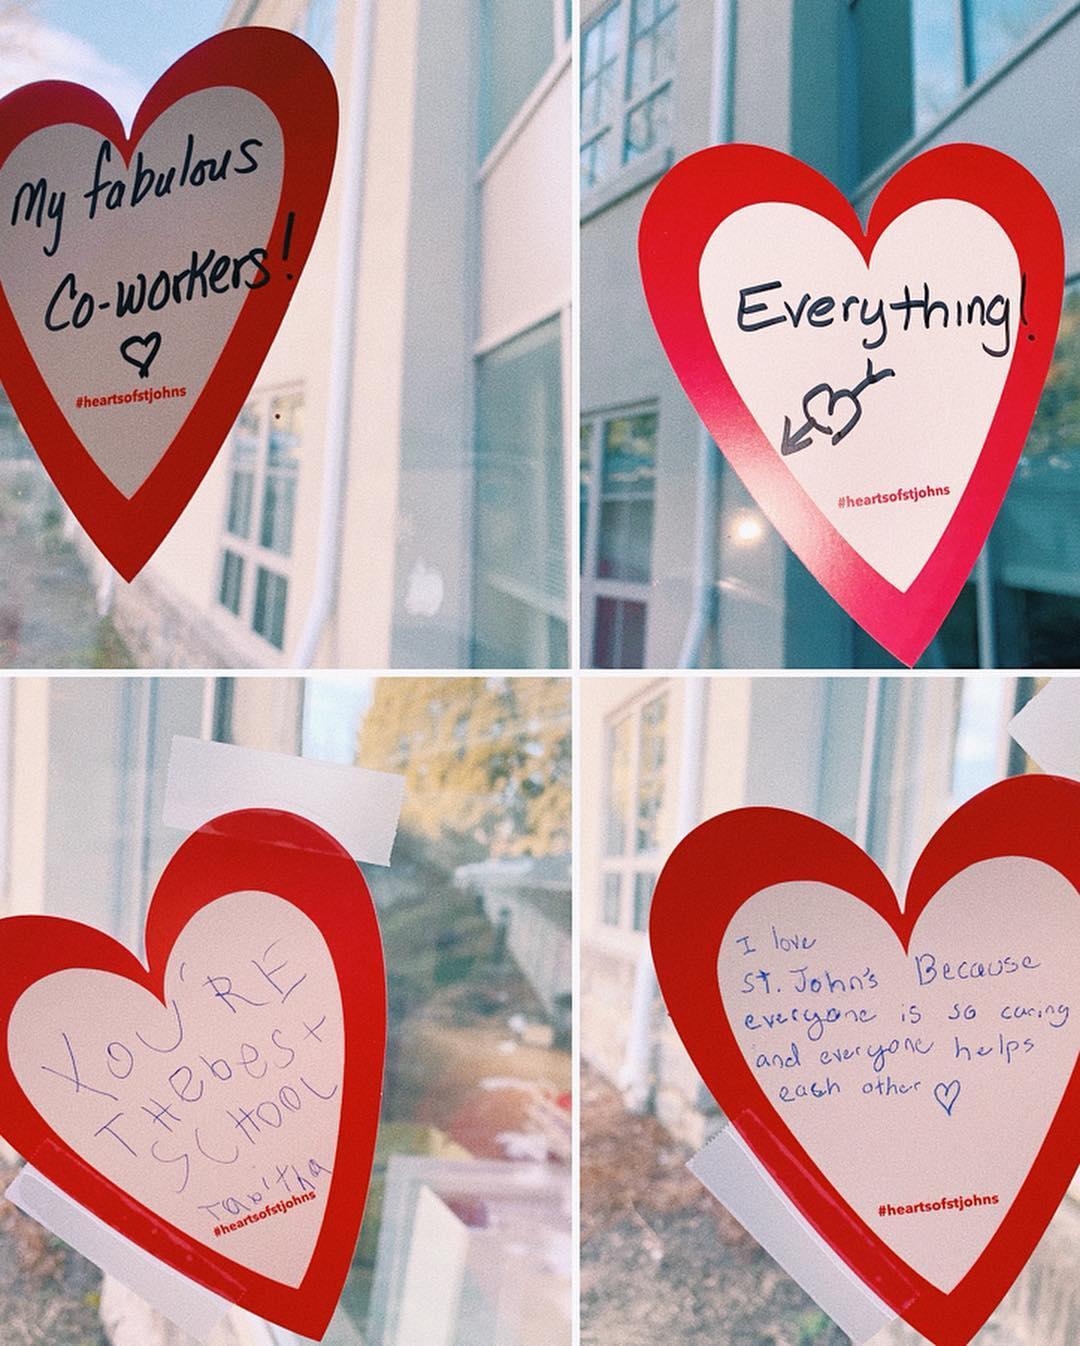 Hearts taped on a window with comments about what people love about St. John's